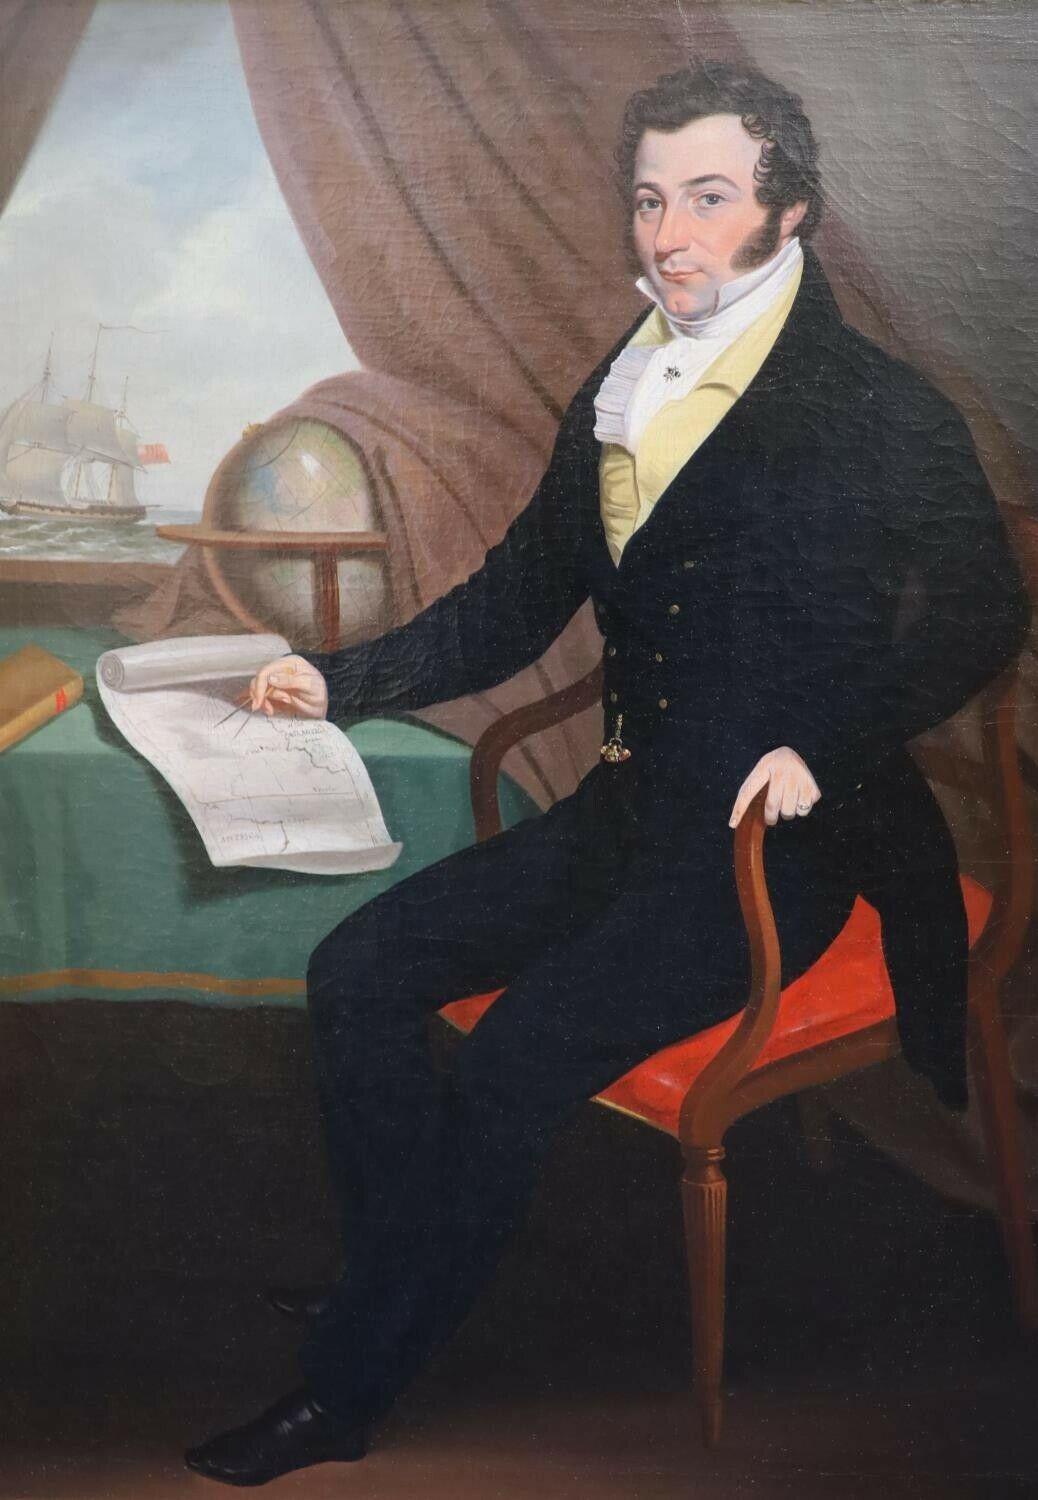 Anglo American School Figurative Painting - ANGLO-AMERICAN SCHOOL C. 1820'S - PORTRAIT OF MERCHANT ON SHIP WITH GLOBE & MAP